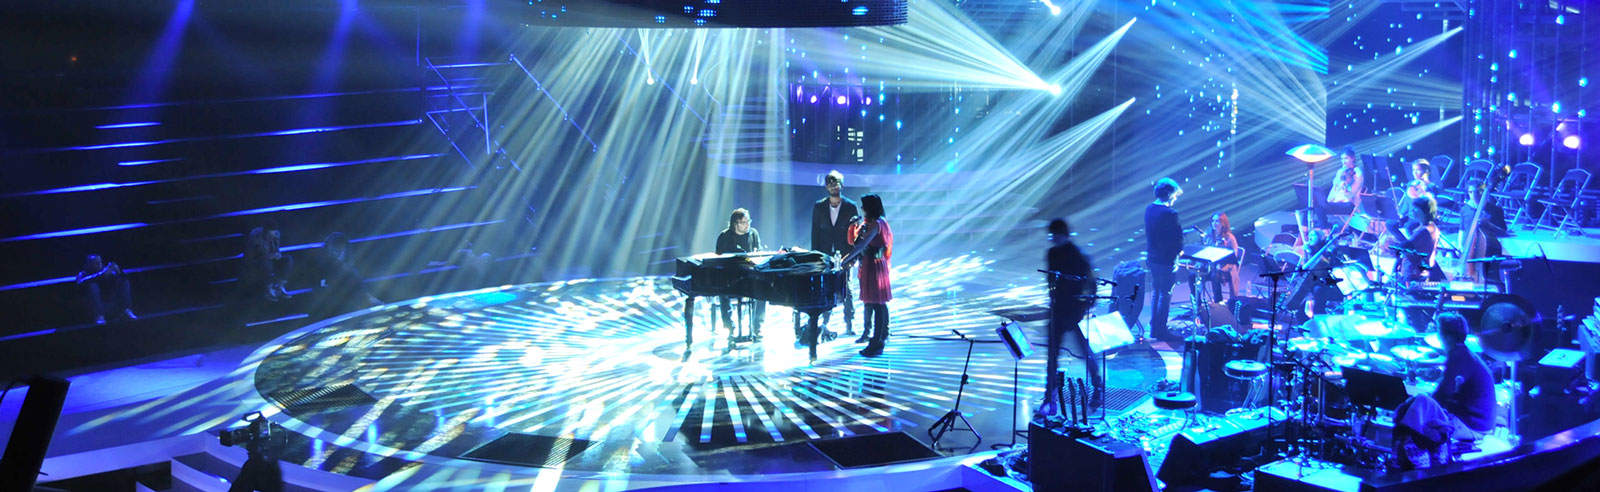 “La Nouvelle Star” french TV show with APG monitors